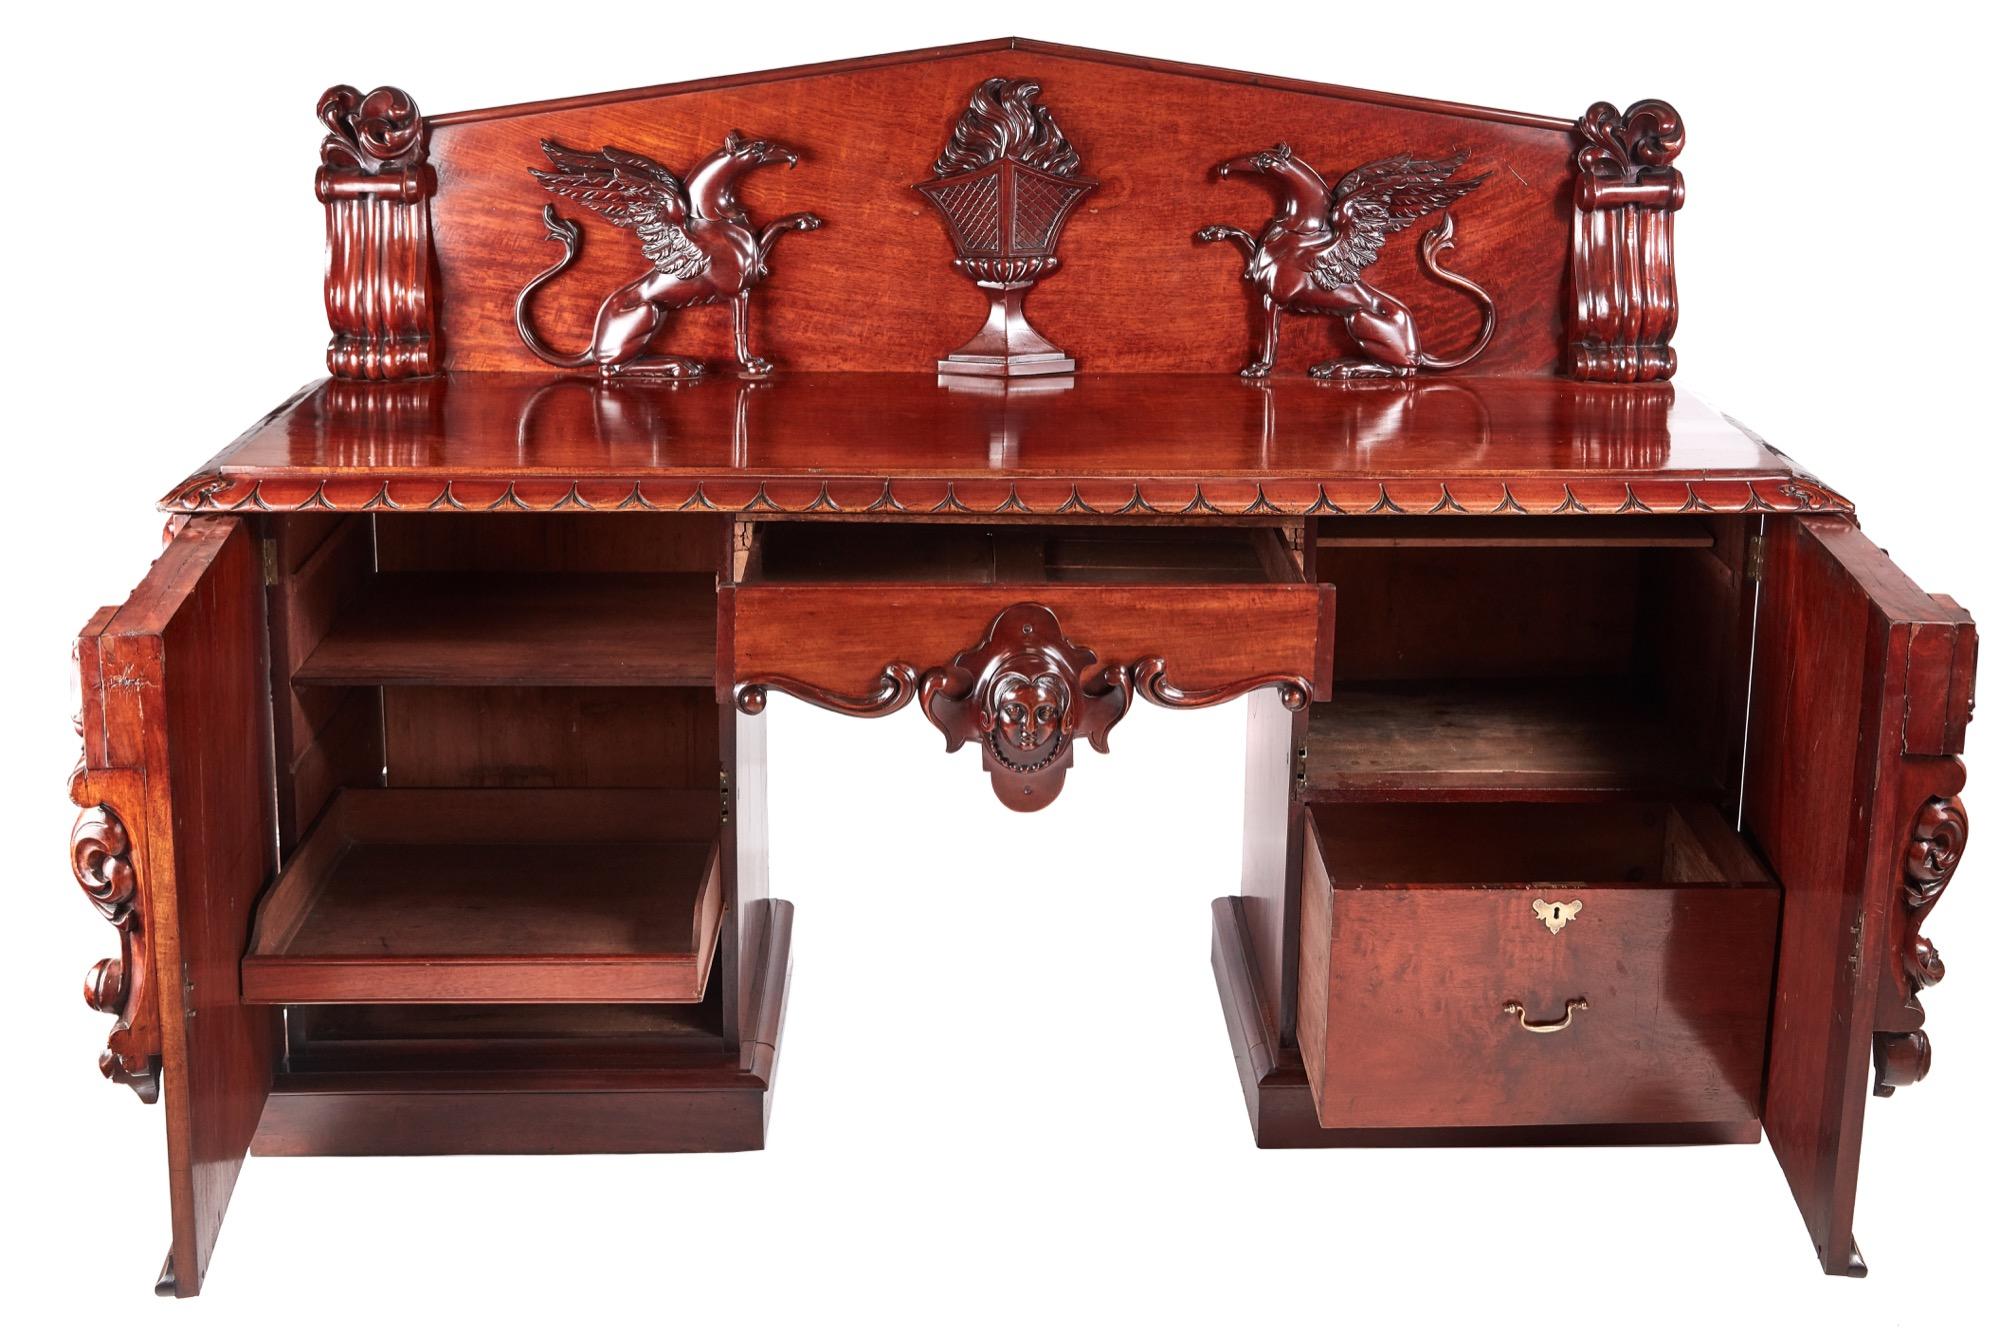 This is truly an outstanding example of a William IV carved mahogany antique sideboard. The back is faced with a pair of high-relief exceptionally detailed carved griffons flanking a central flaming urn. The base having an outstanding mahogany top